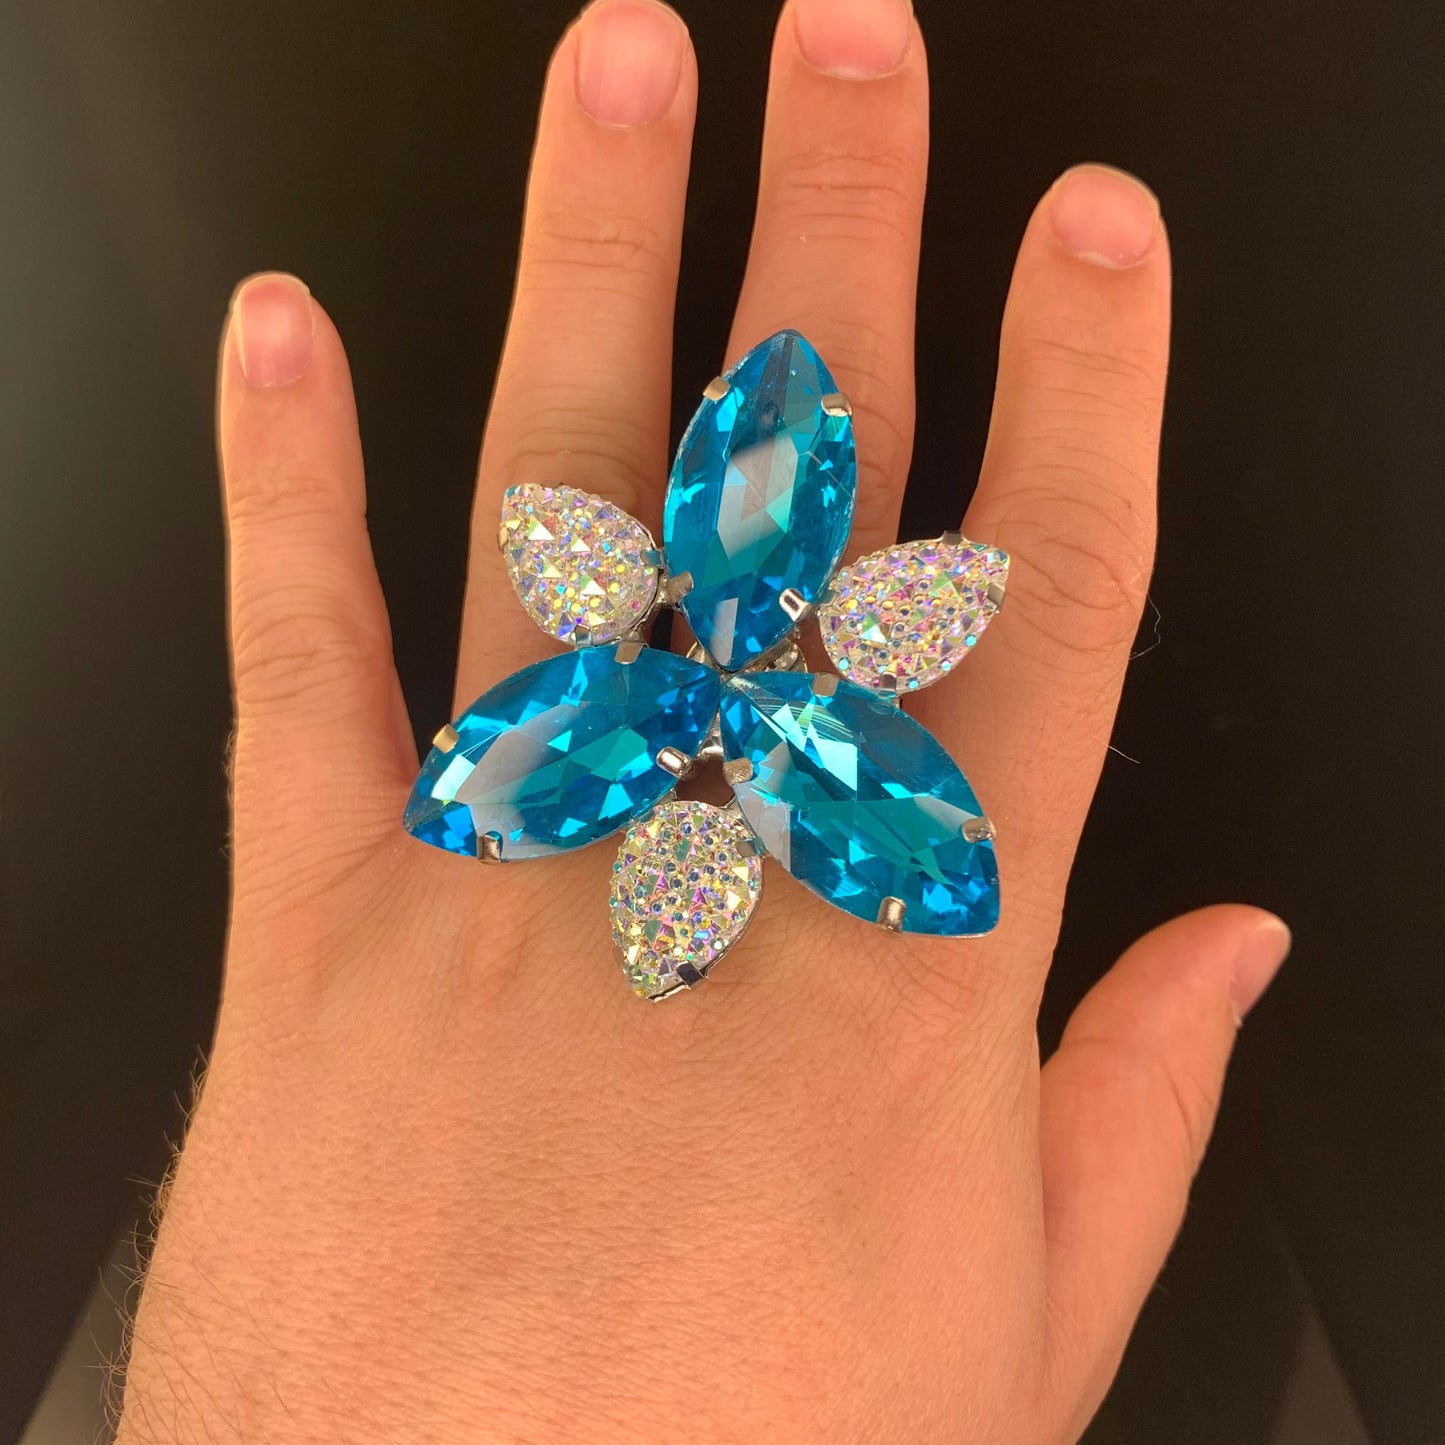 Light Blue and cosmic cluster Ring / Cocktail Dress Ring / Adjustable back / Gift / Drag Queen Ring /Costume Jewellery / Cabaret Jewels